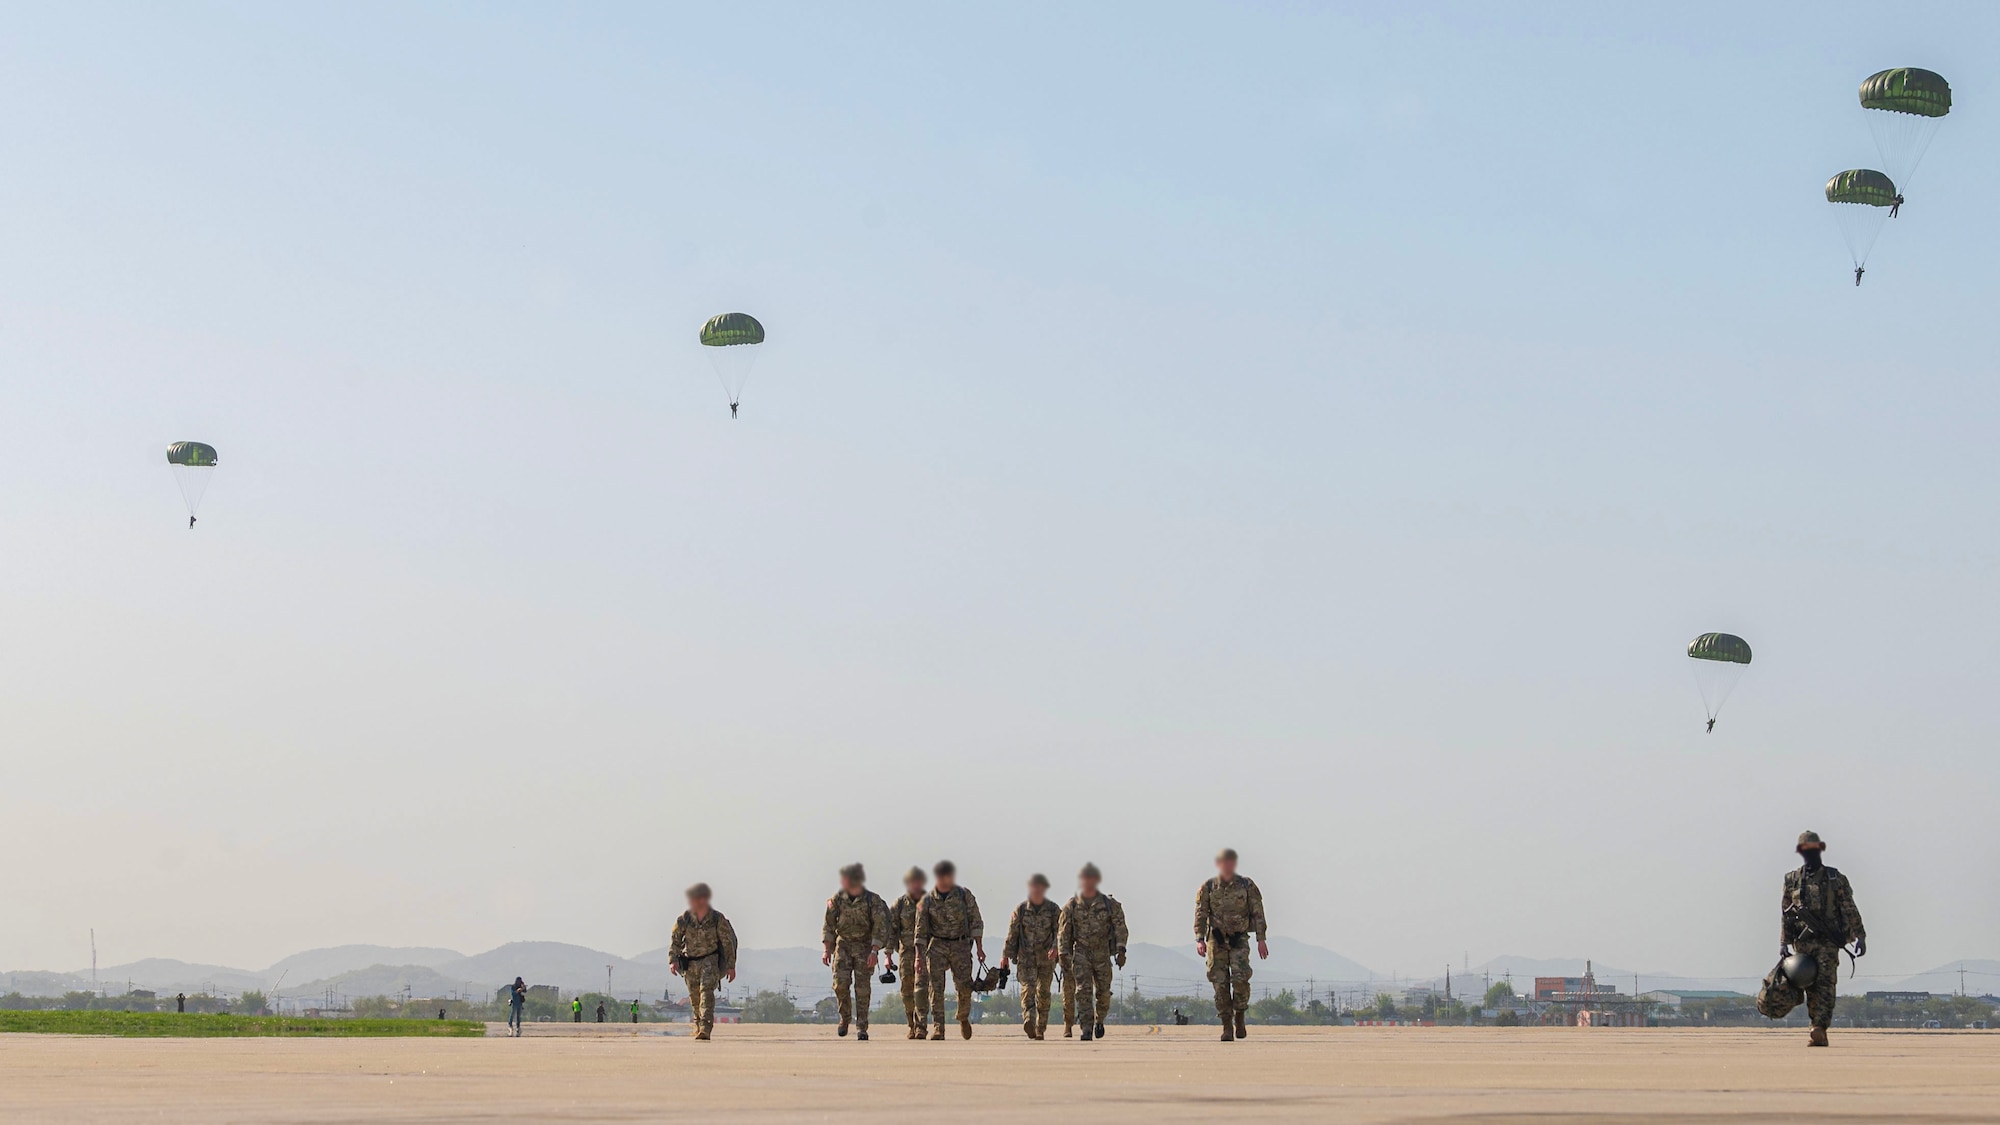 Republic of Korea and U.S. service members participate in airborne jump training during Korea Flight Training 24 at Osan Air Base, ROK, April 18, 2024. KFT is a routine, regularly scheduled annual training that is designed to improve interoperability throughout the Indo-Pacific area of responsibility, while strengthening the U.S.-ROK alliance and their commitments to maintain peace in Northeast Asia. (U.S. Air Force photo by Staff Sgt. Aubree Owens)